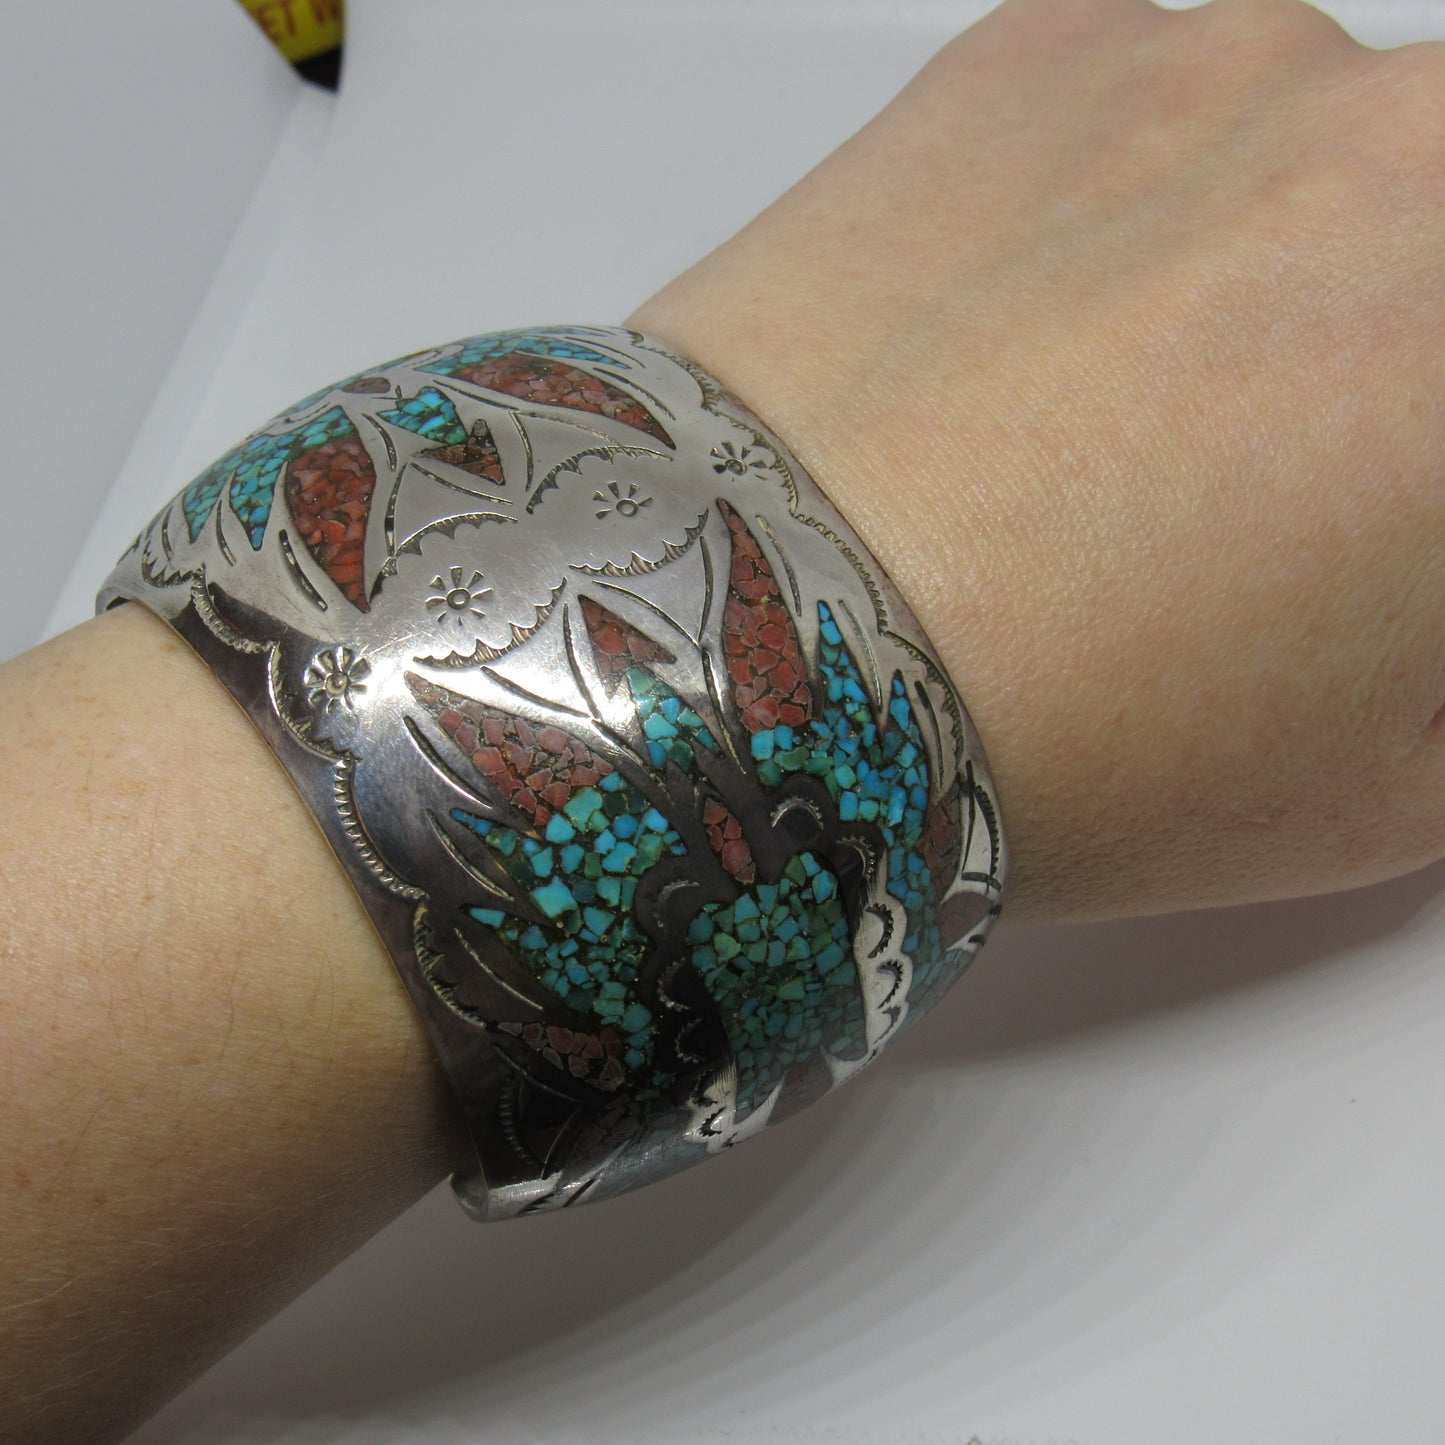 Vintage Navajo Signed BN Sterling Silver Large Inlay Turquoise & Coral Bracelet - 8 inch